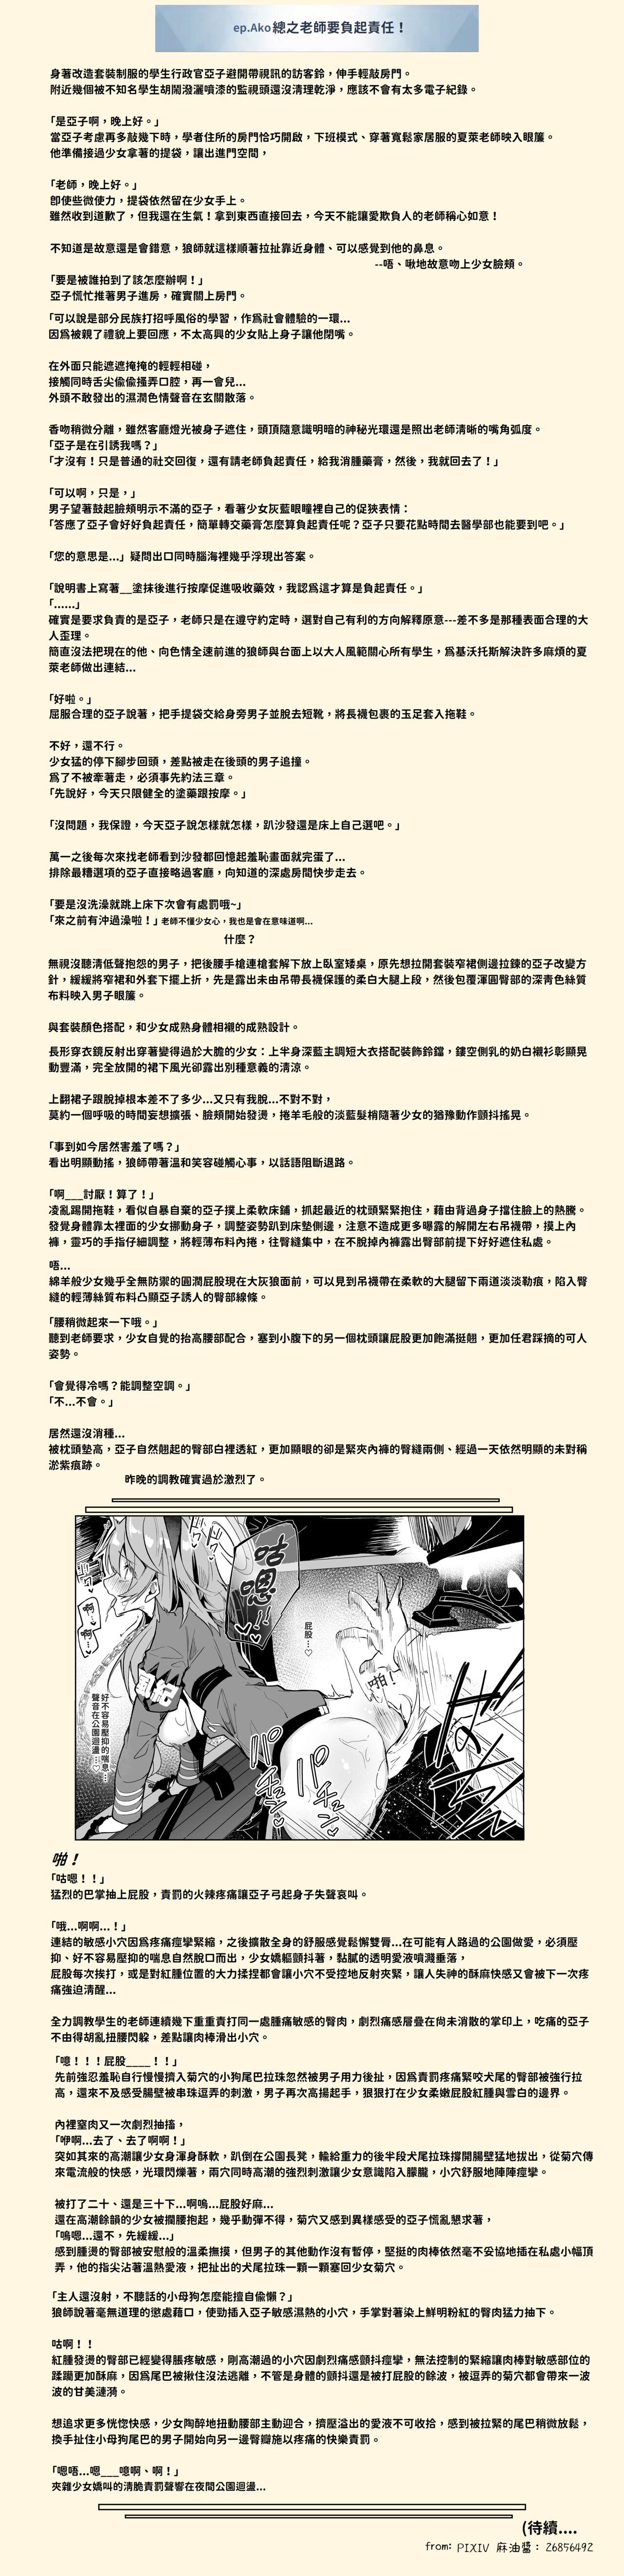 Cop アコちゃん調教ミニ漫画 - Blue archive Long Hair - Page 10